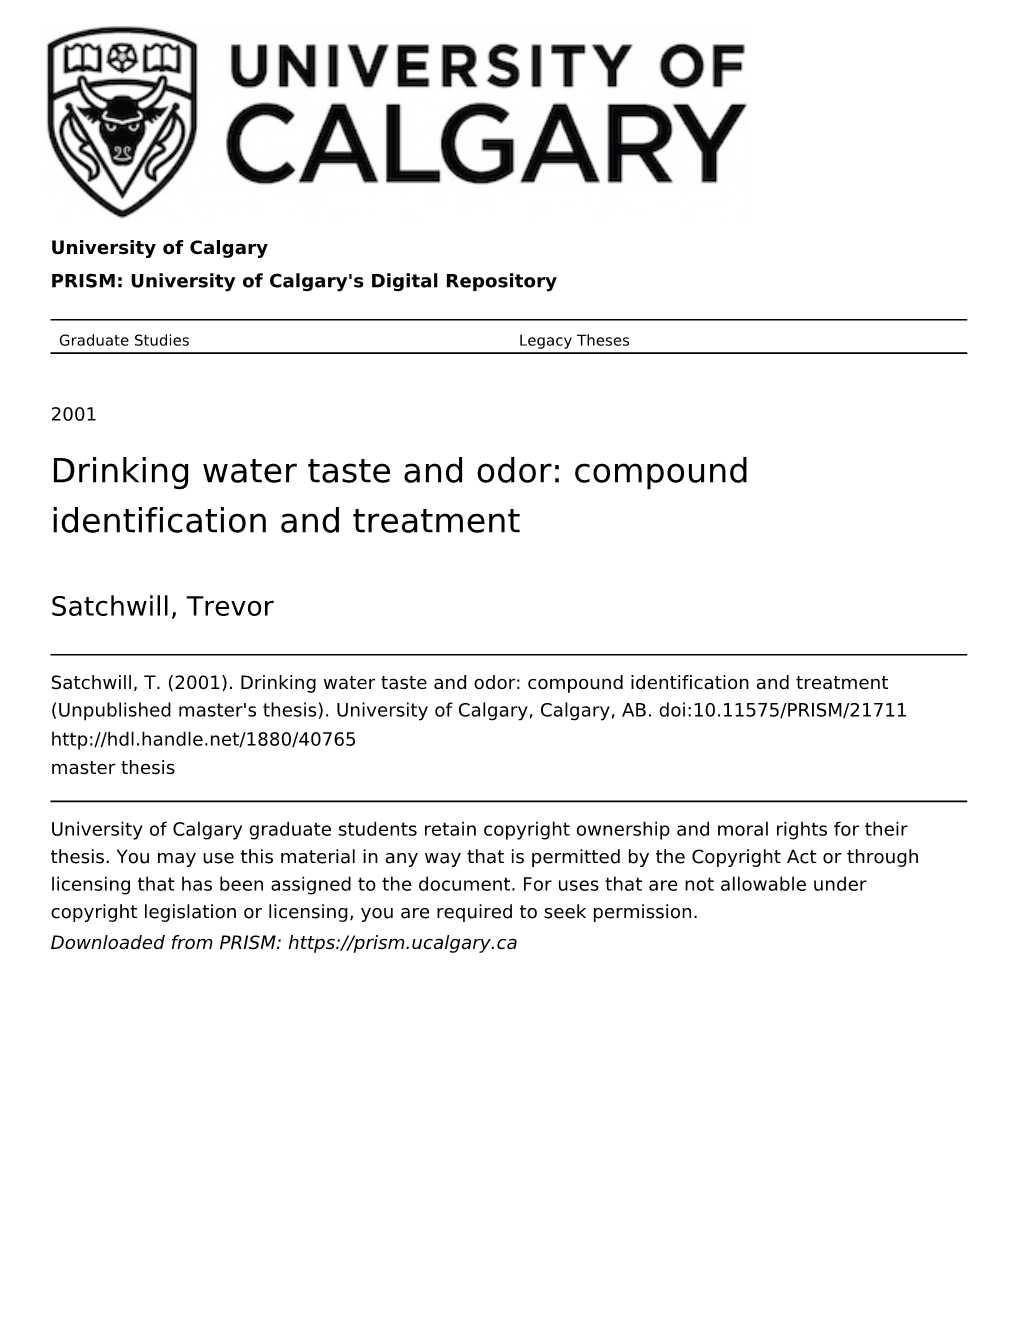 Drinking Water Taste and Odor: Compound Identification and Treatment